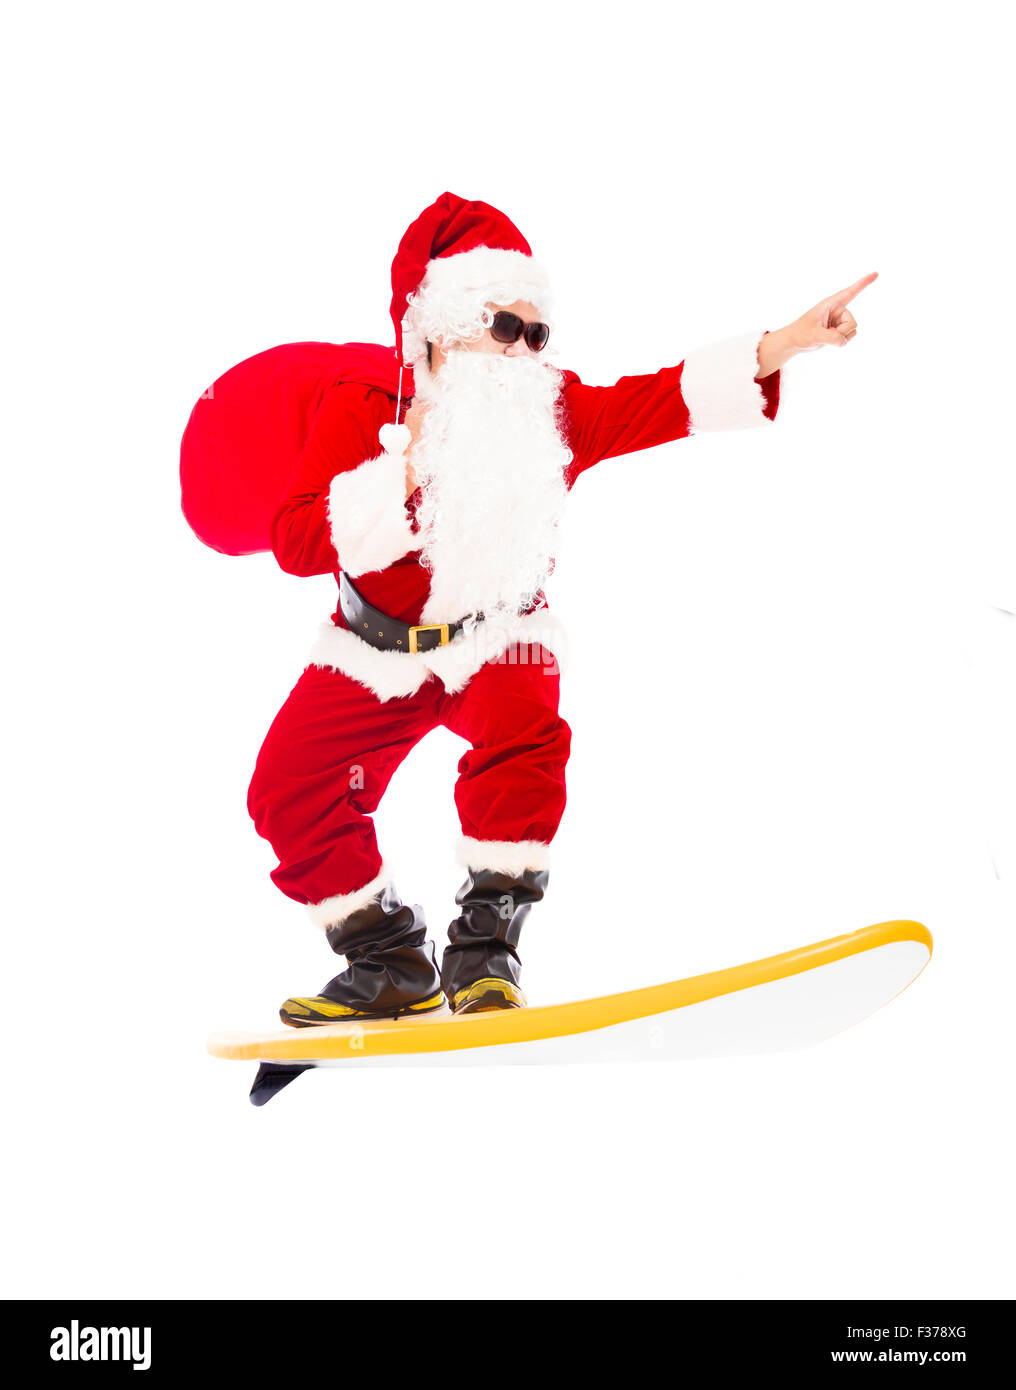 Happy Santa Claus surfing with surf board Stock Photo